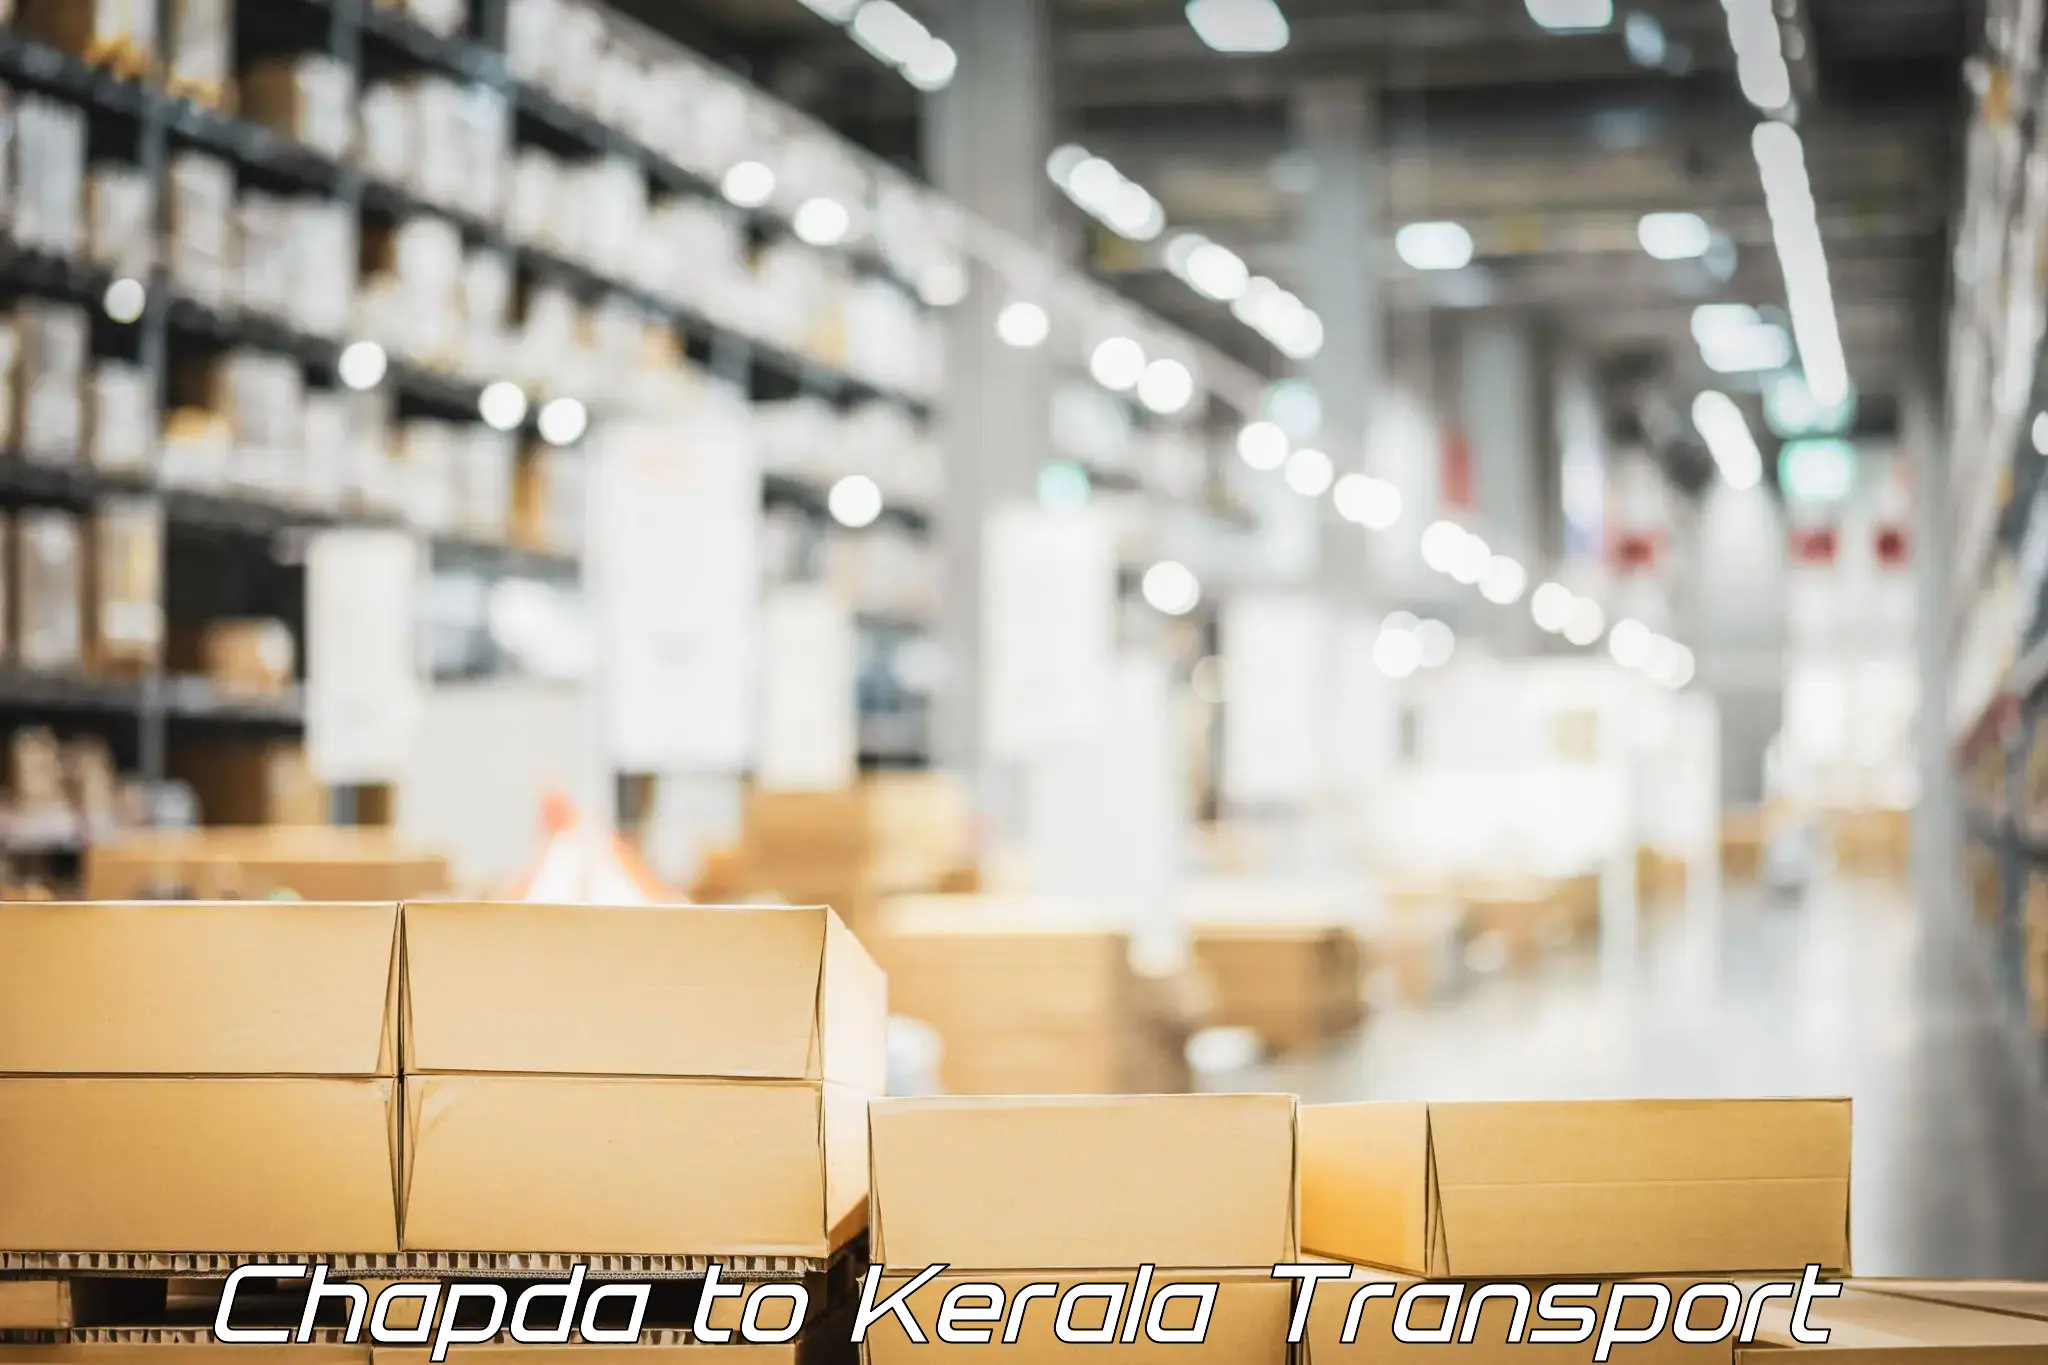 Shipping services Chapda to Edappal